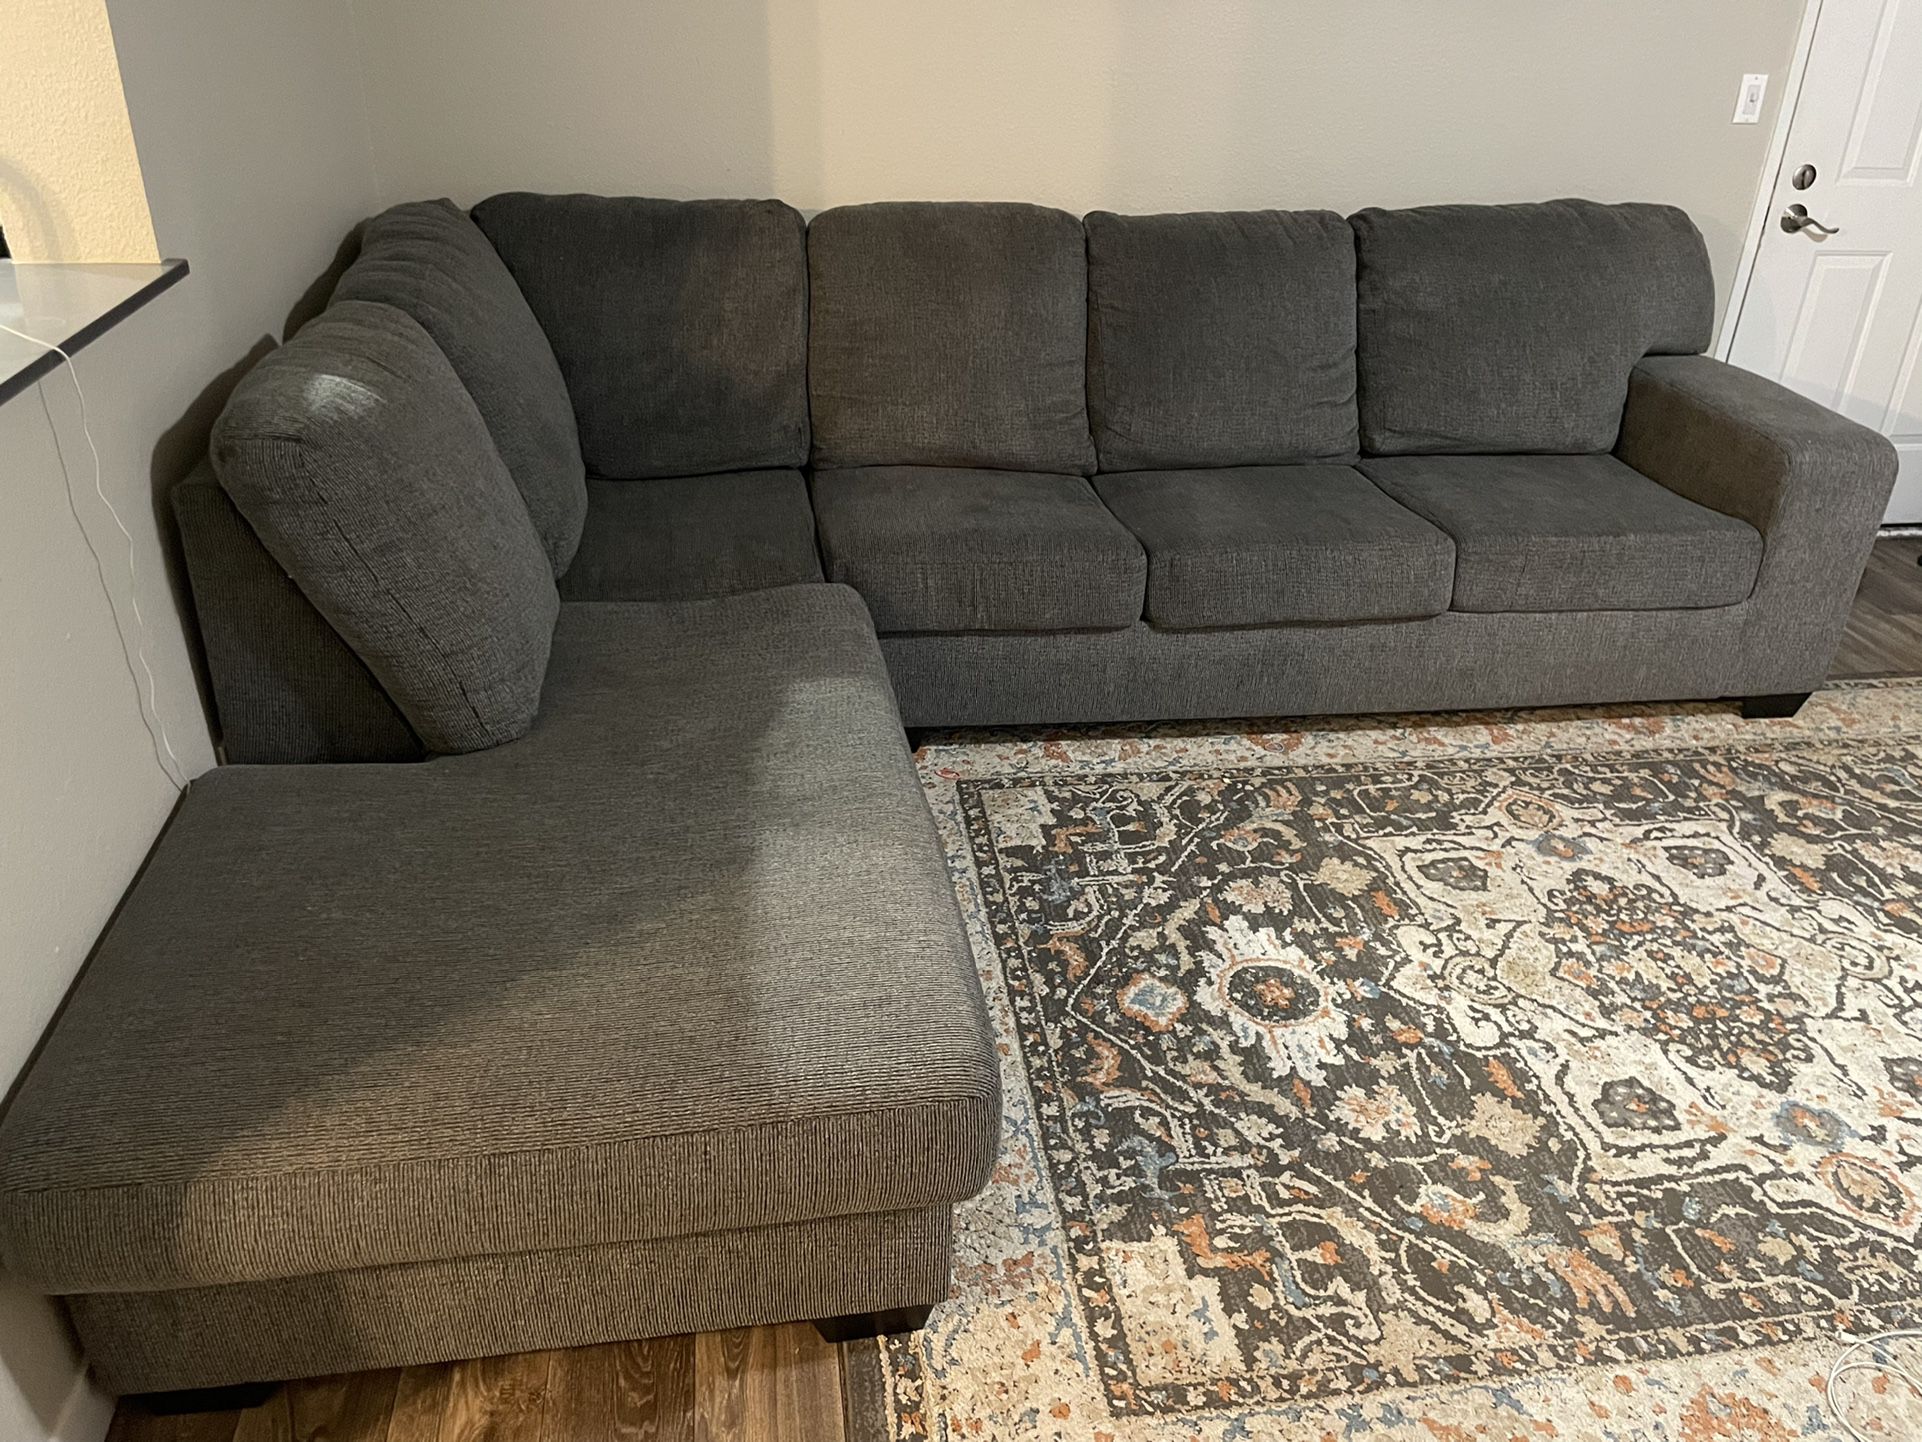 10/10 Couch For Sale